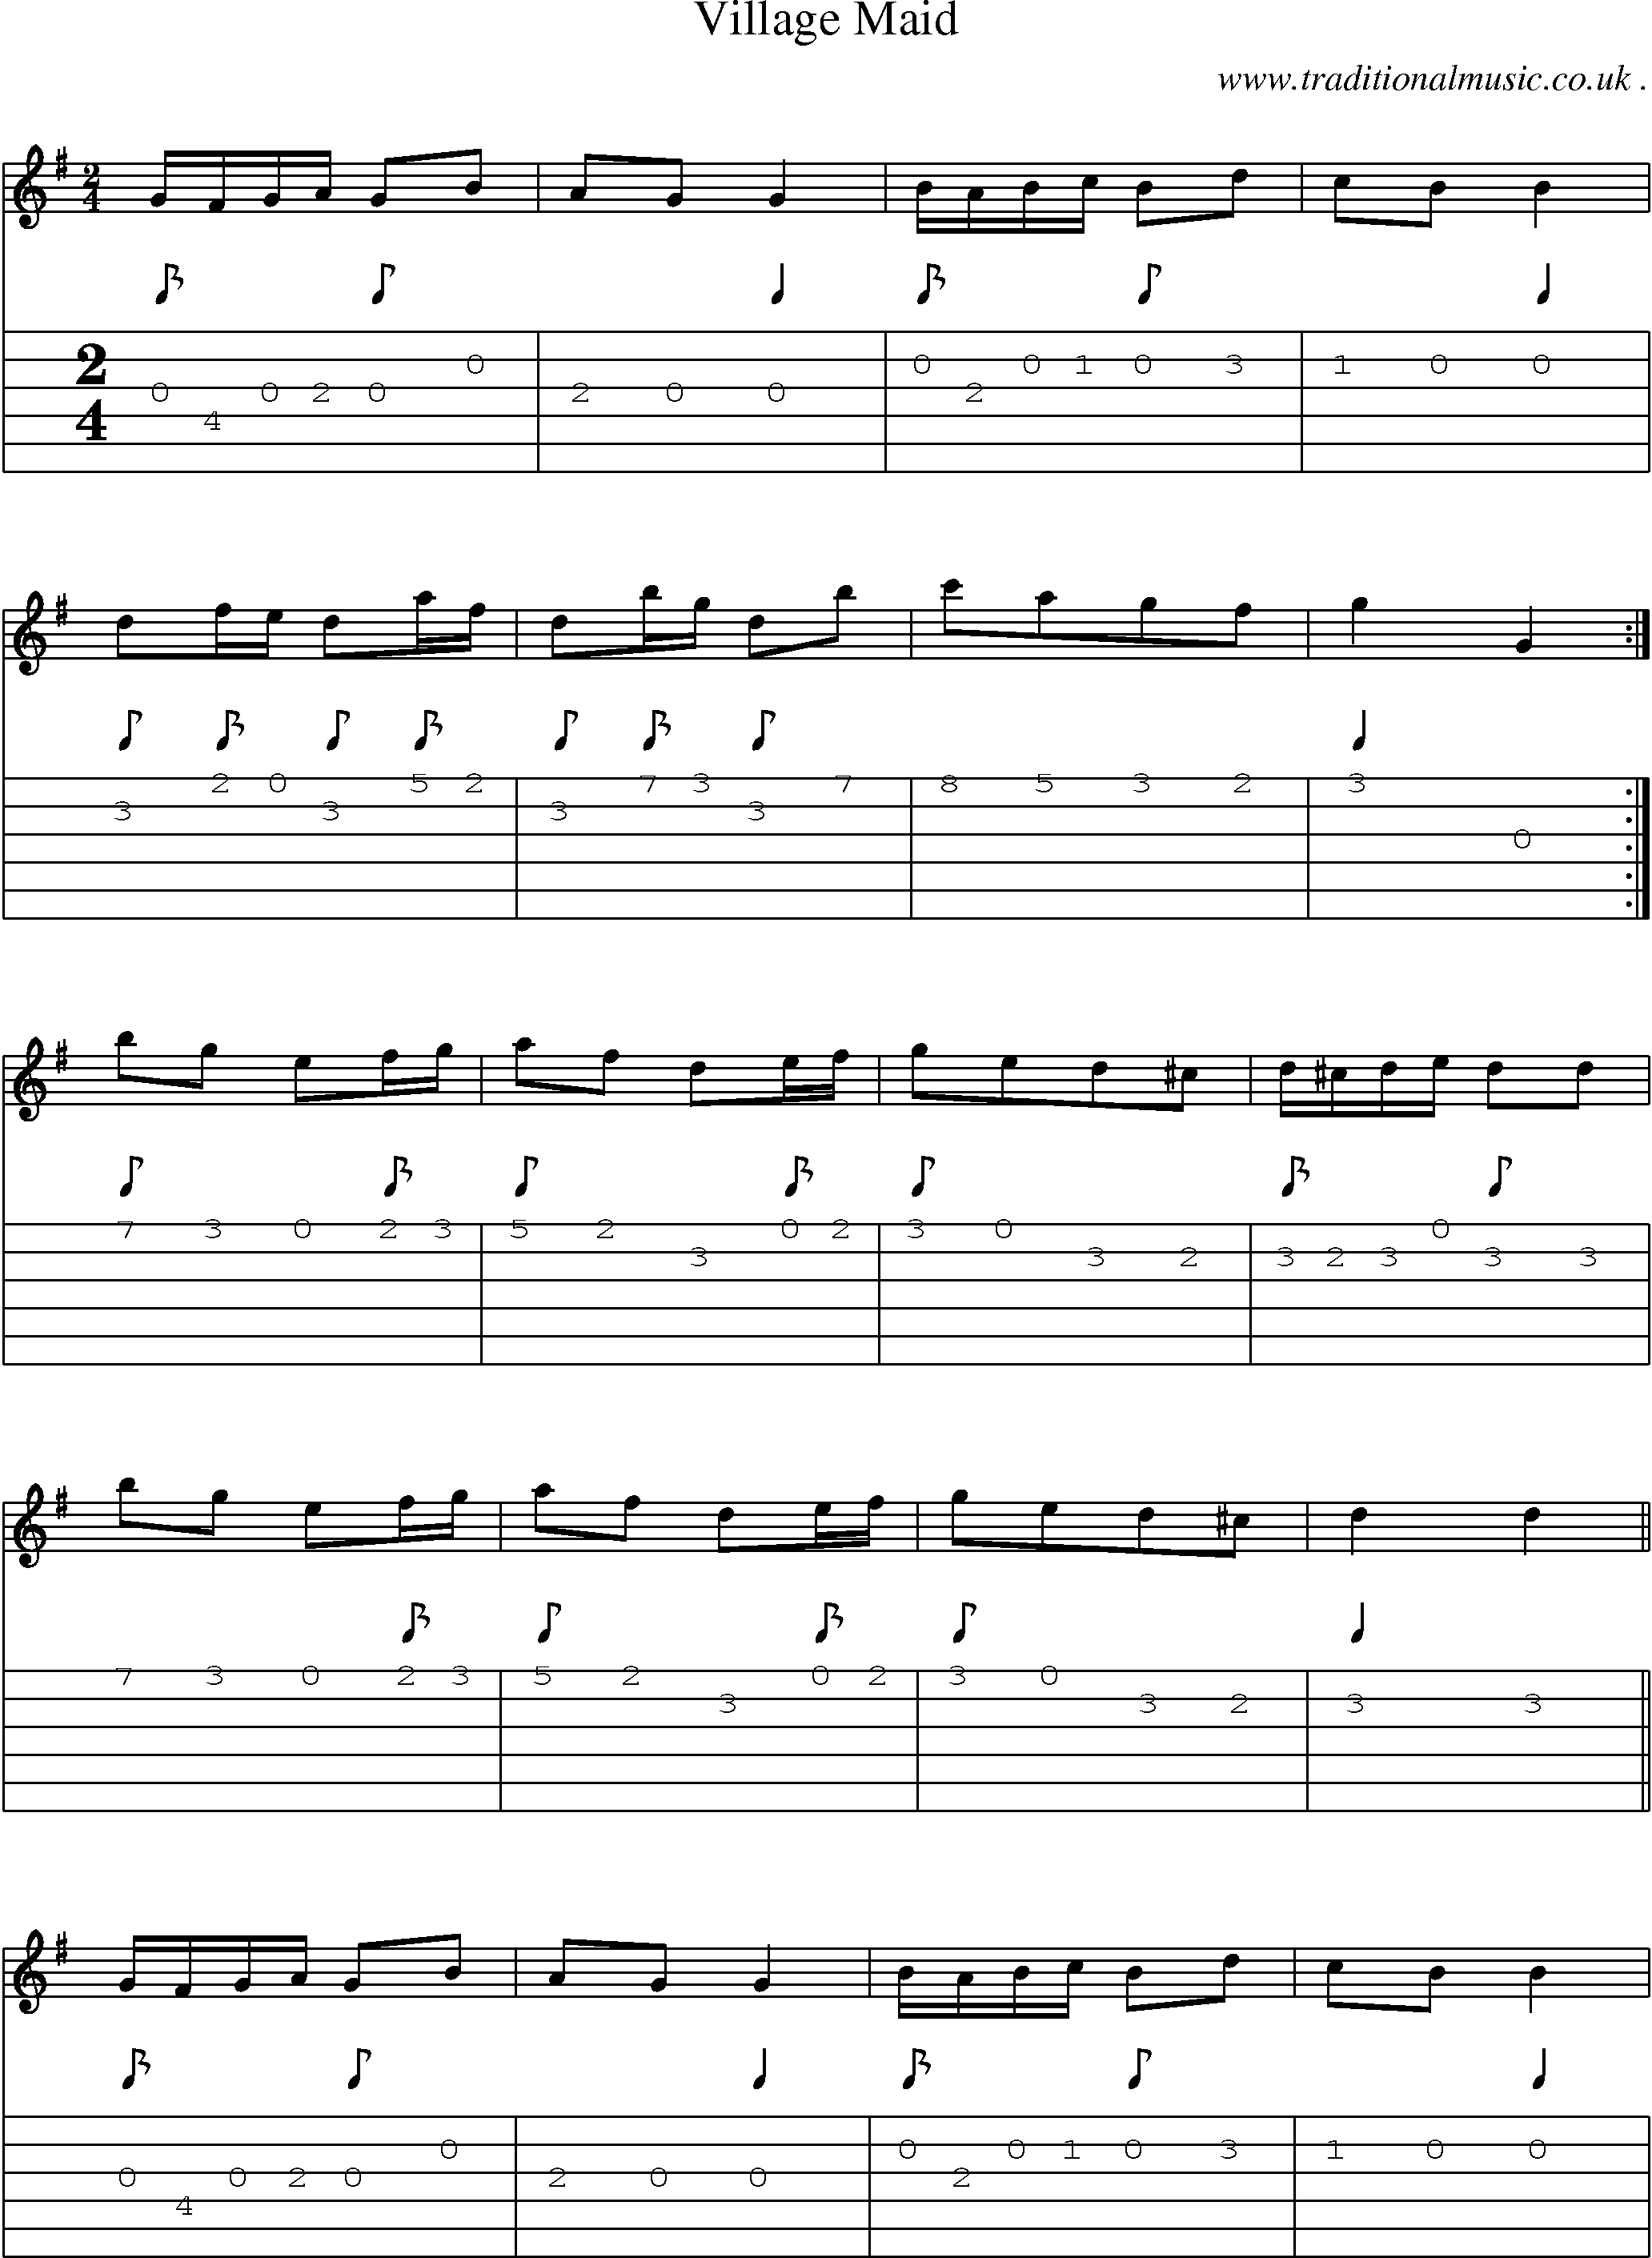 Sheet-Music and Guitar Tabs for Village Maid